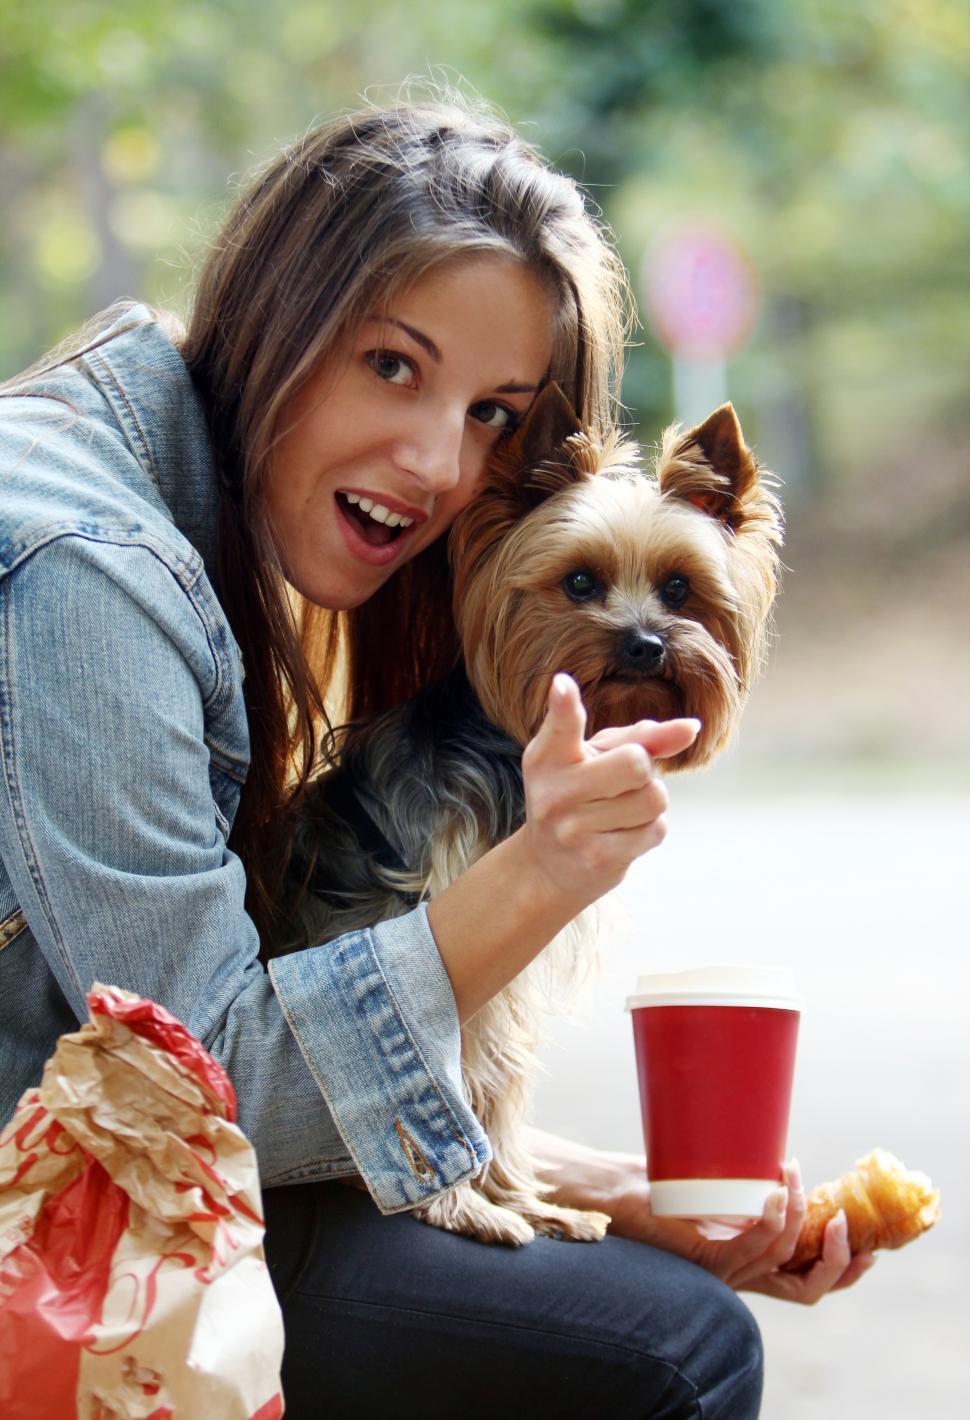 Free Image of Woman eating lunch with her dog 